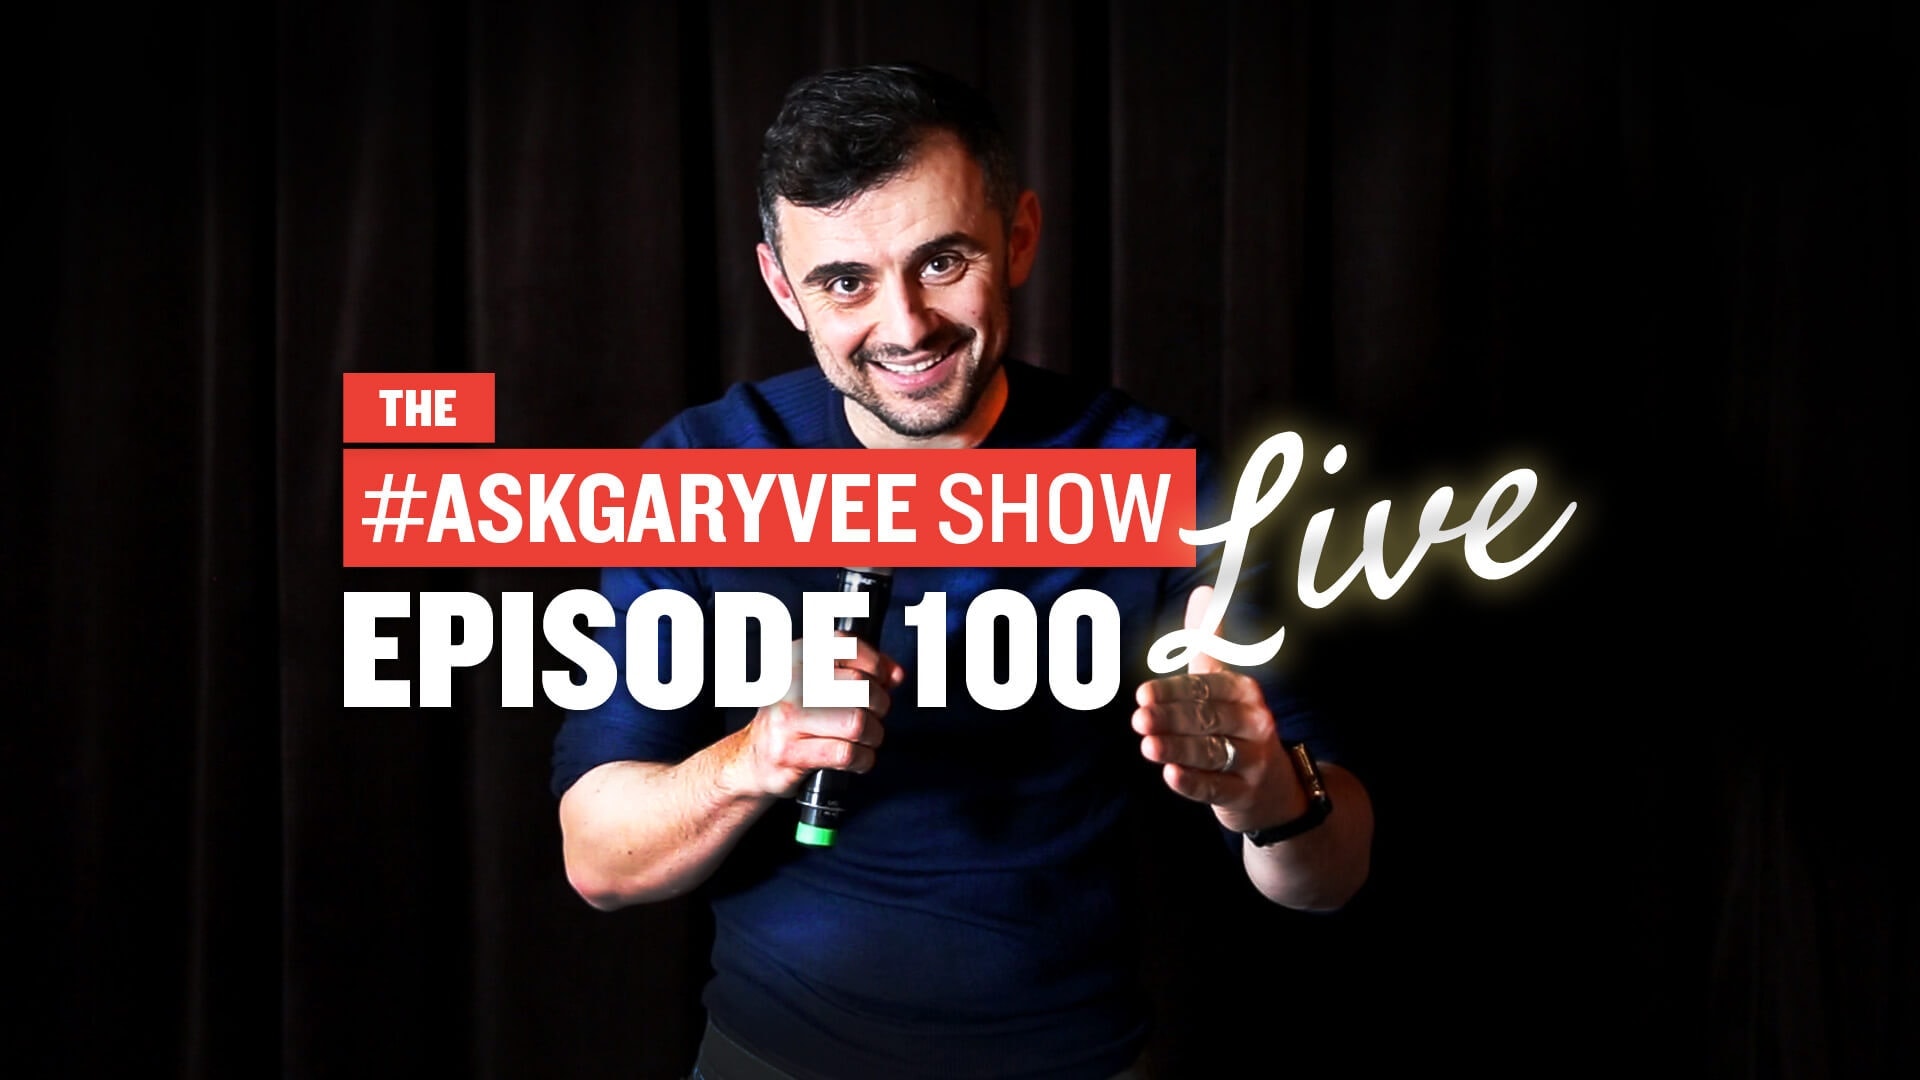 The 100th Episode of the #AskGaryVee Show